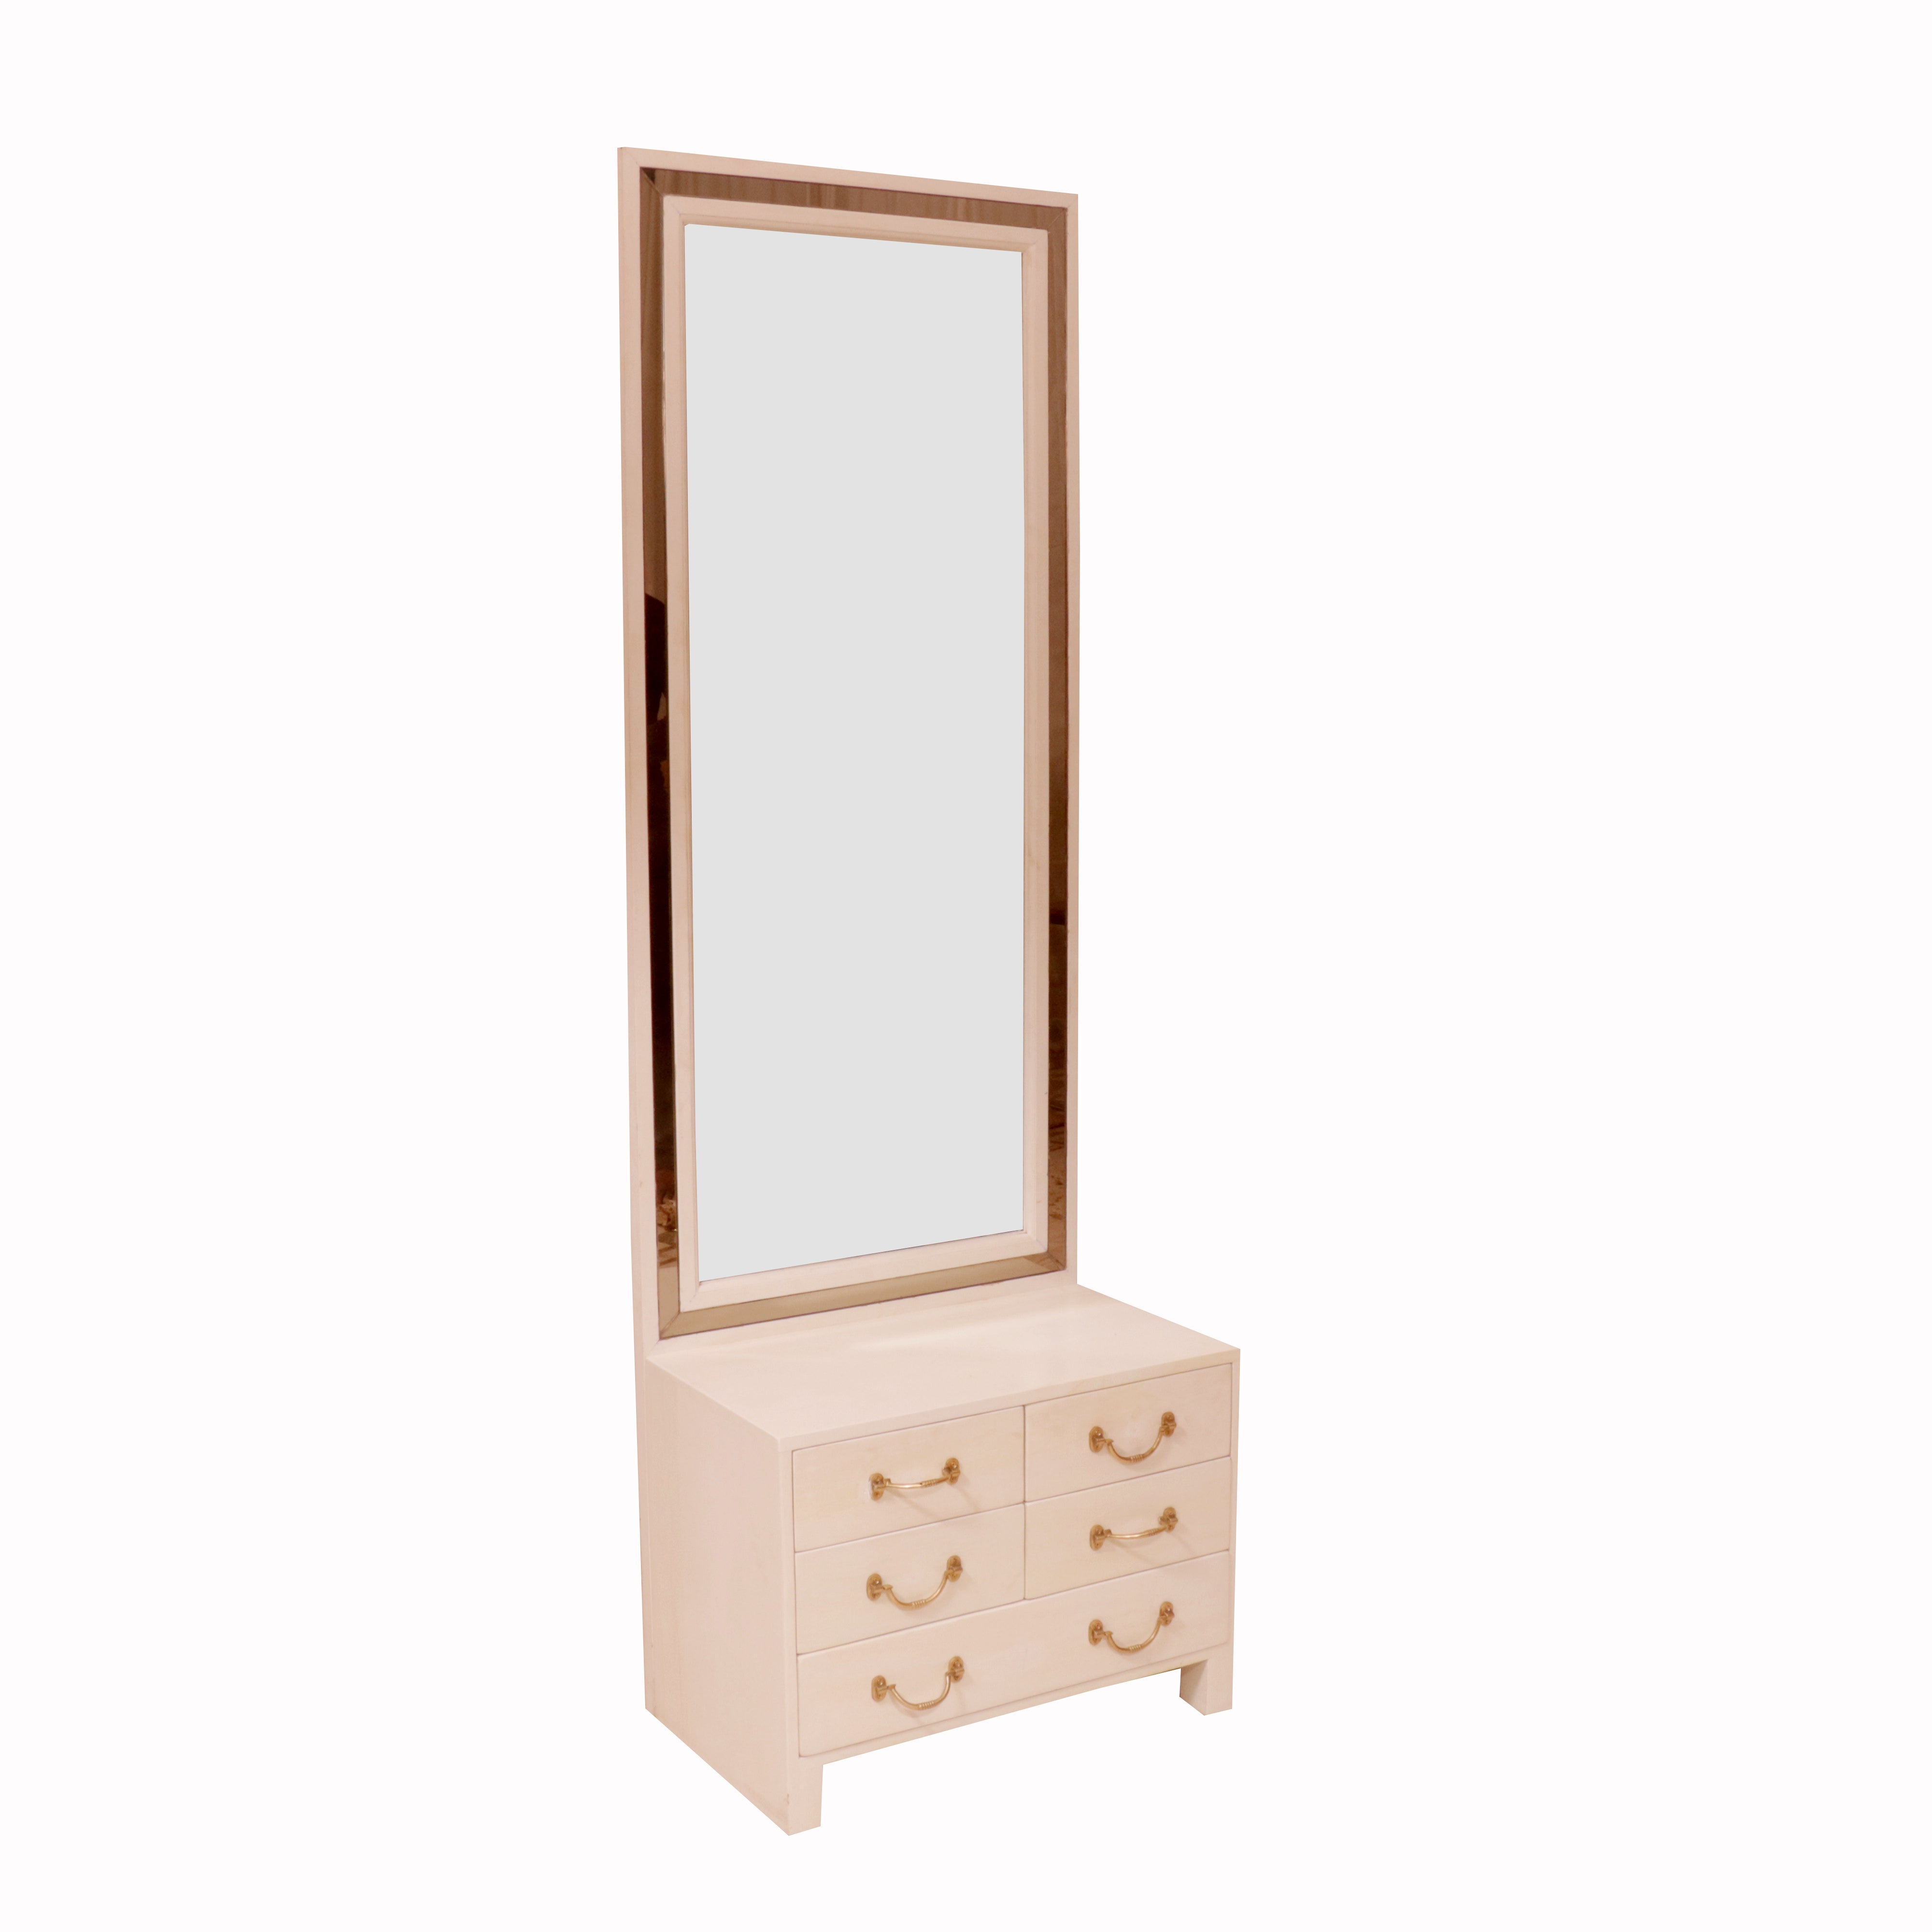 White Mirror with Drawers Dressing Table